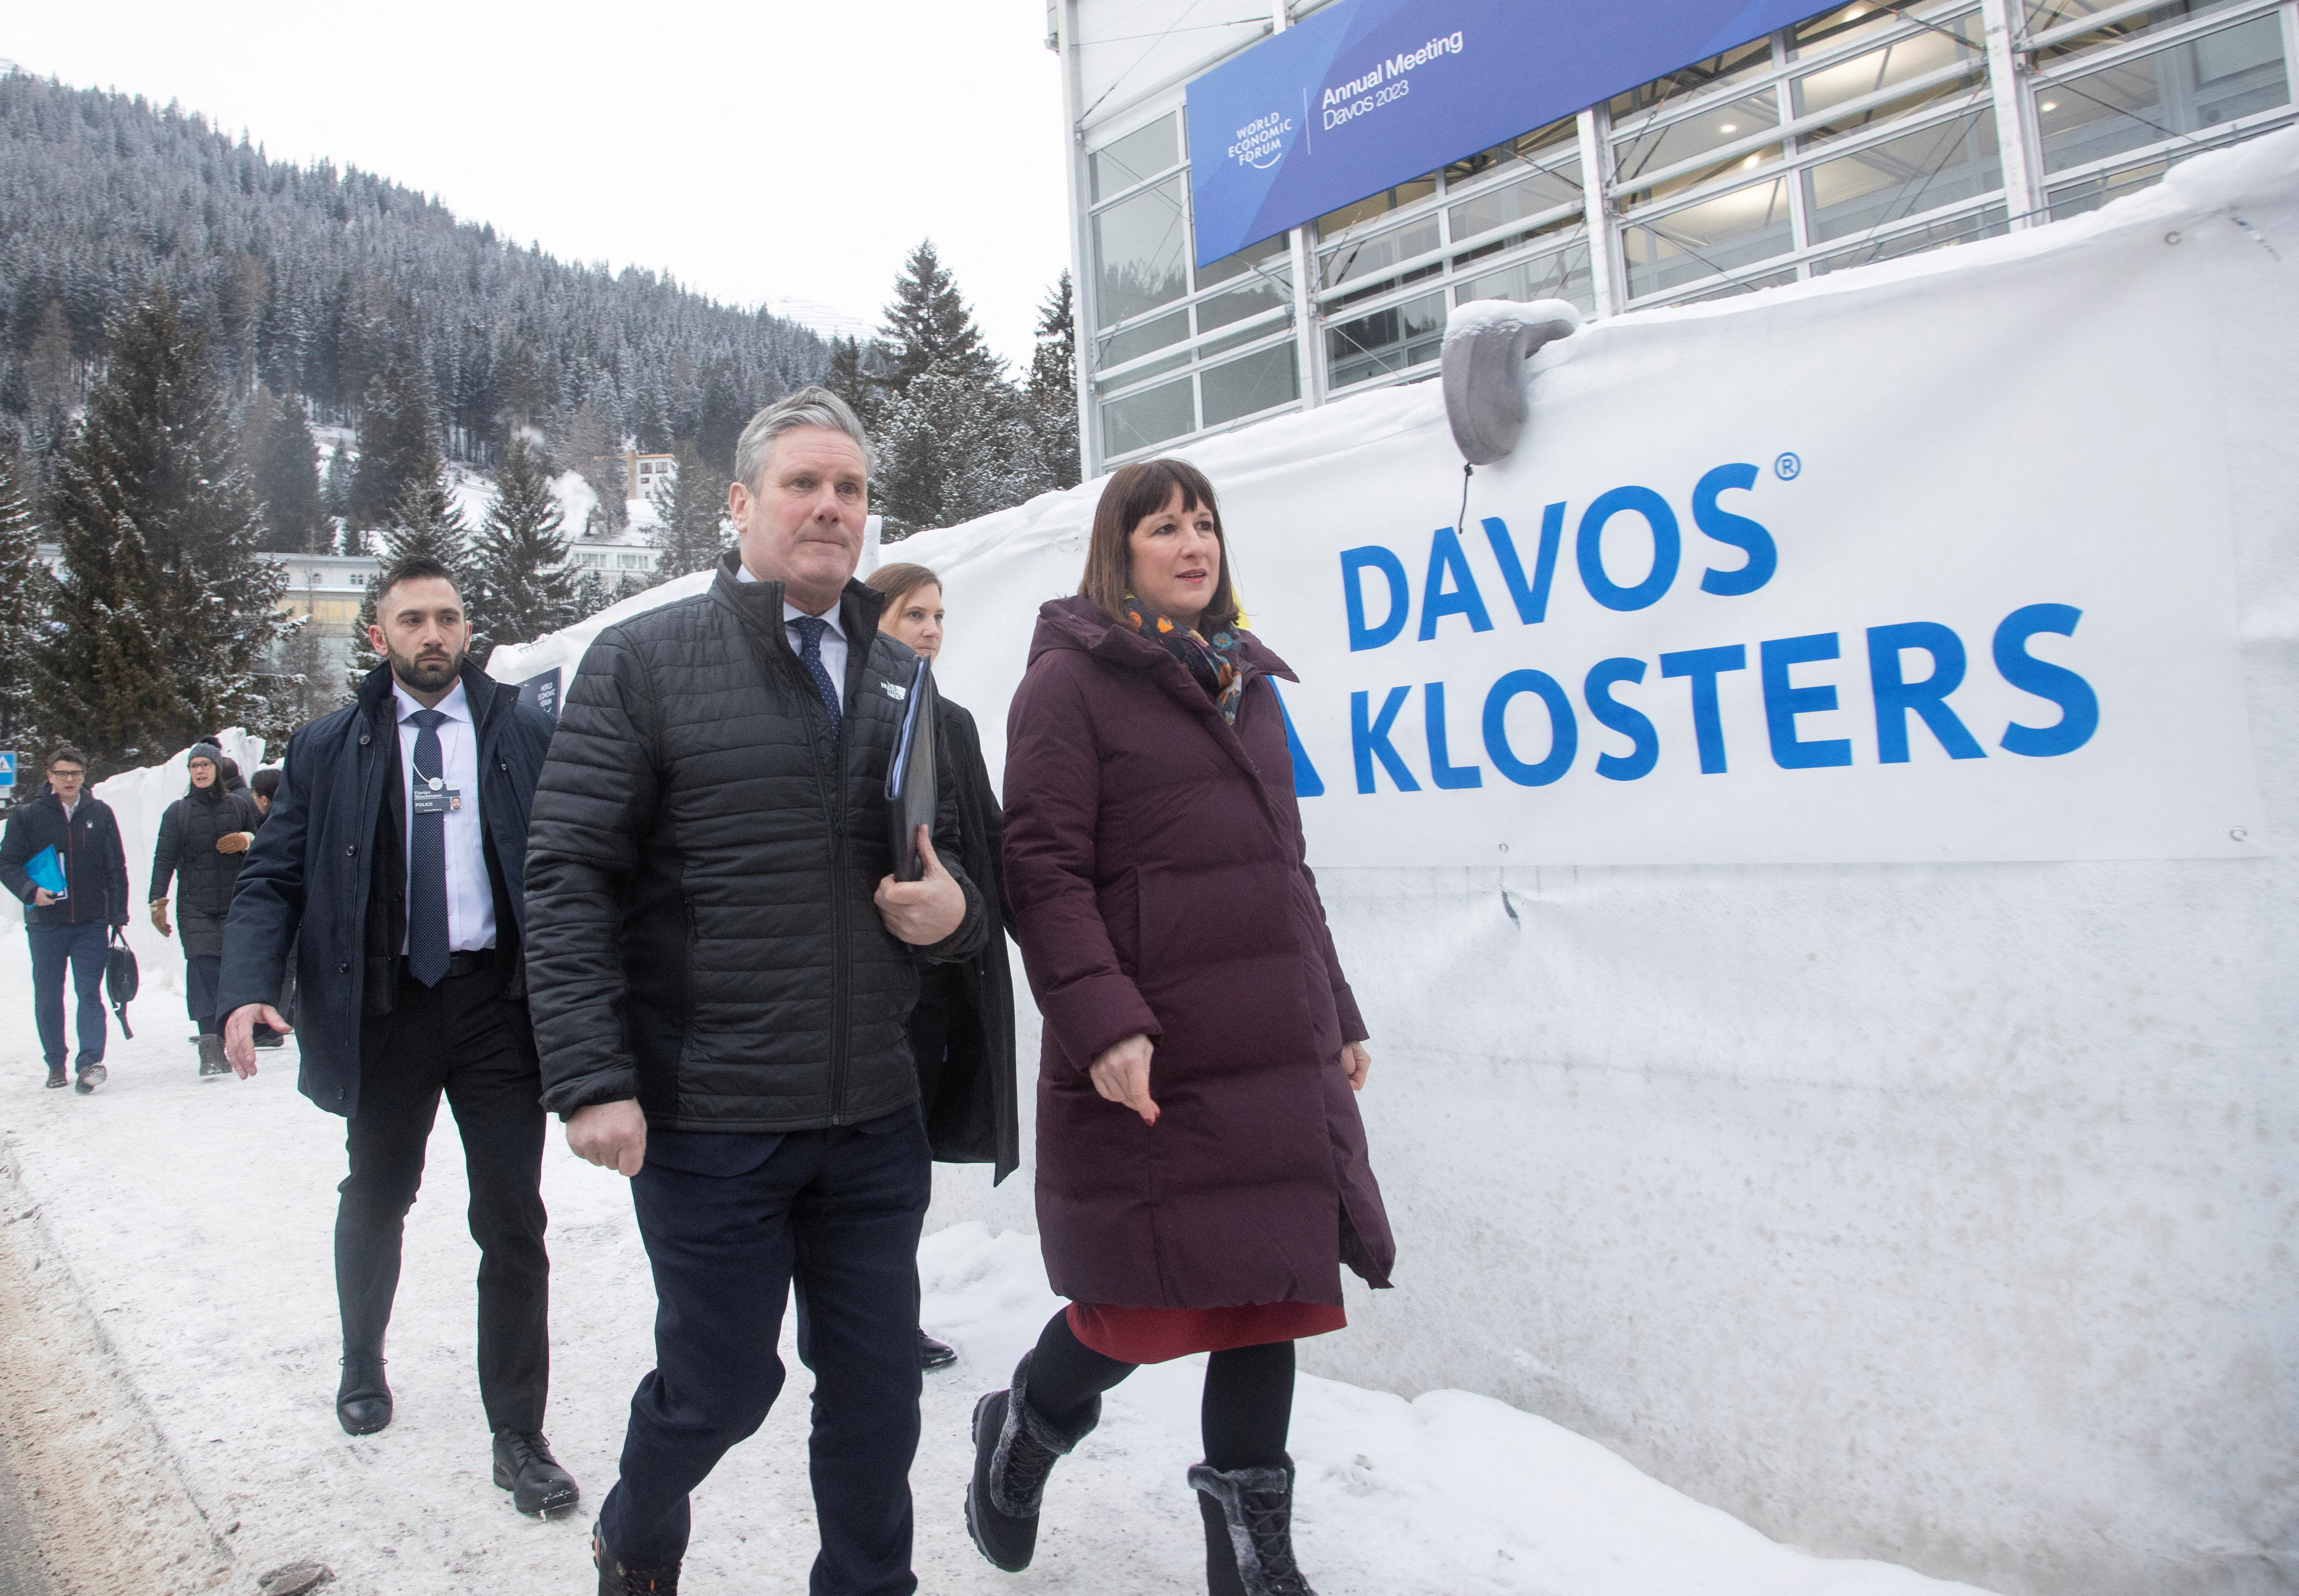 Britain's Labour leader Starmer and the party's financial chief Reeves walk to a meeting during the World Economic Forum in Davos